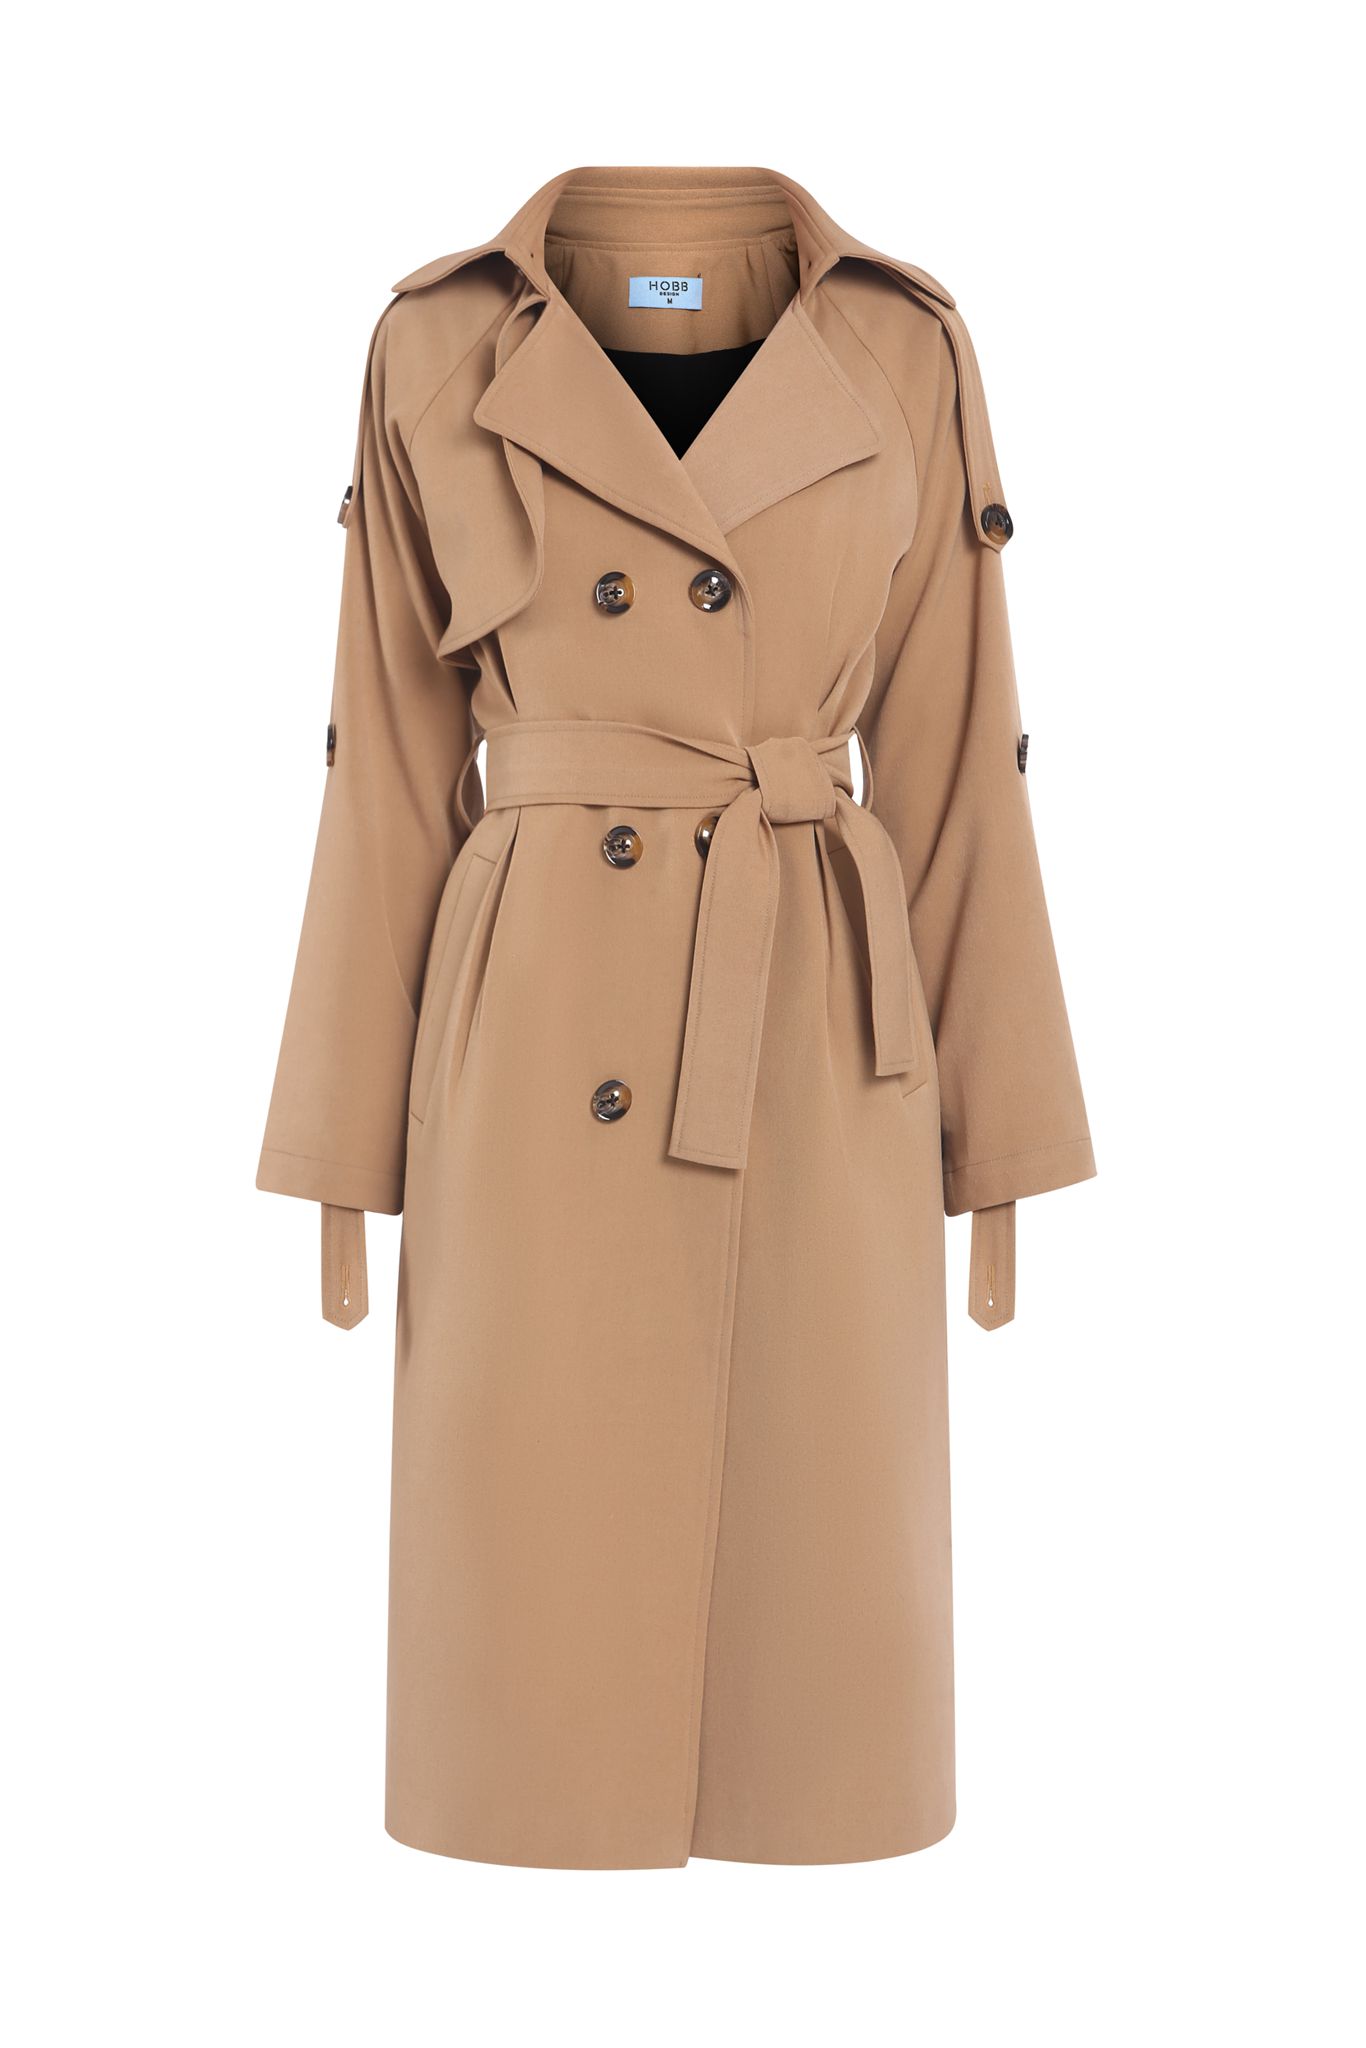 DOUBLE-BREAST COTTON TWILL TRENCH COAT | HOBB Design